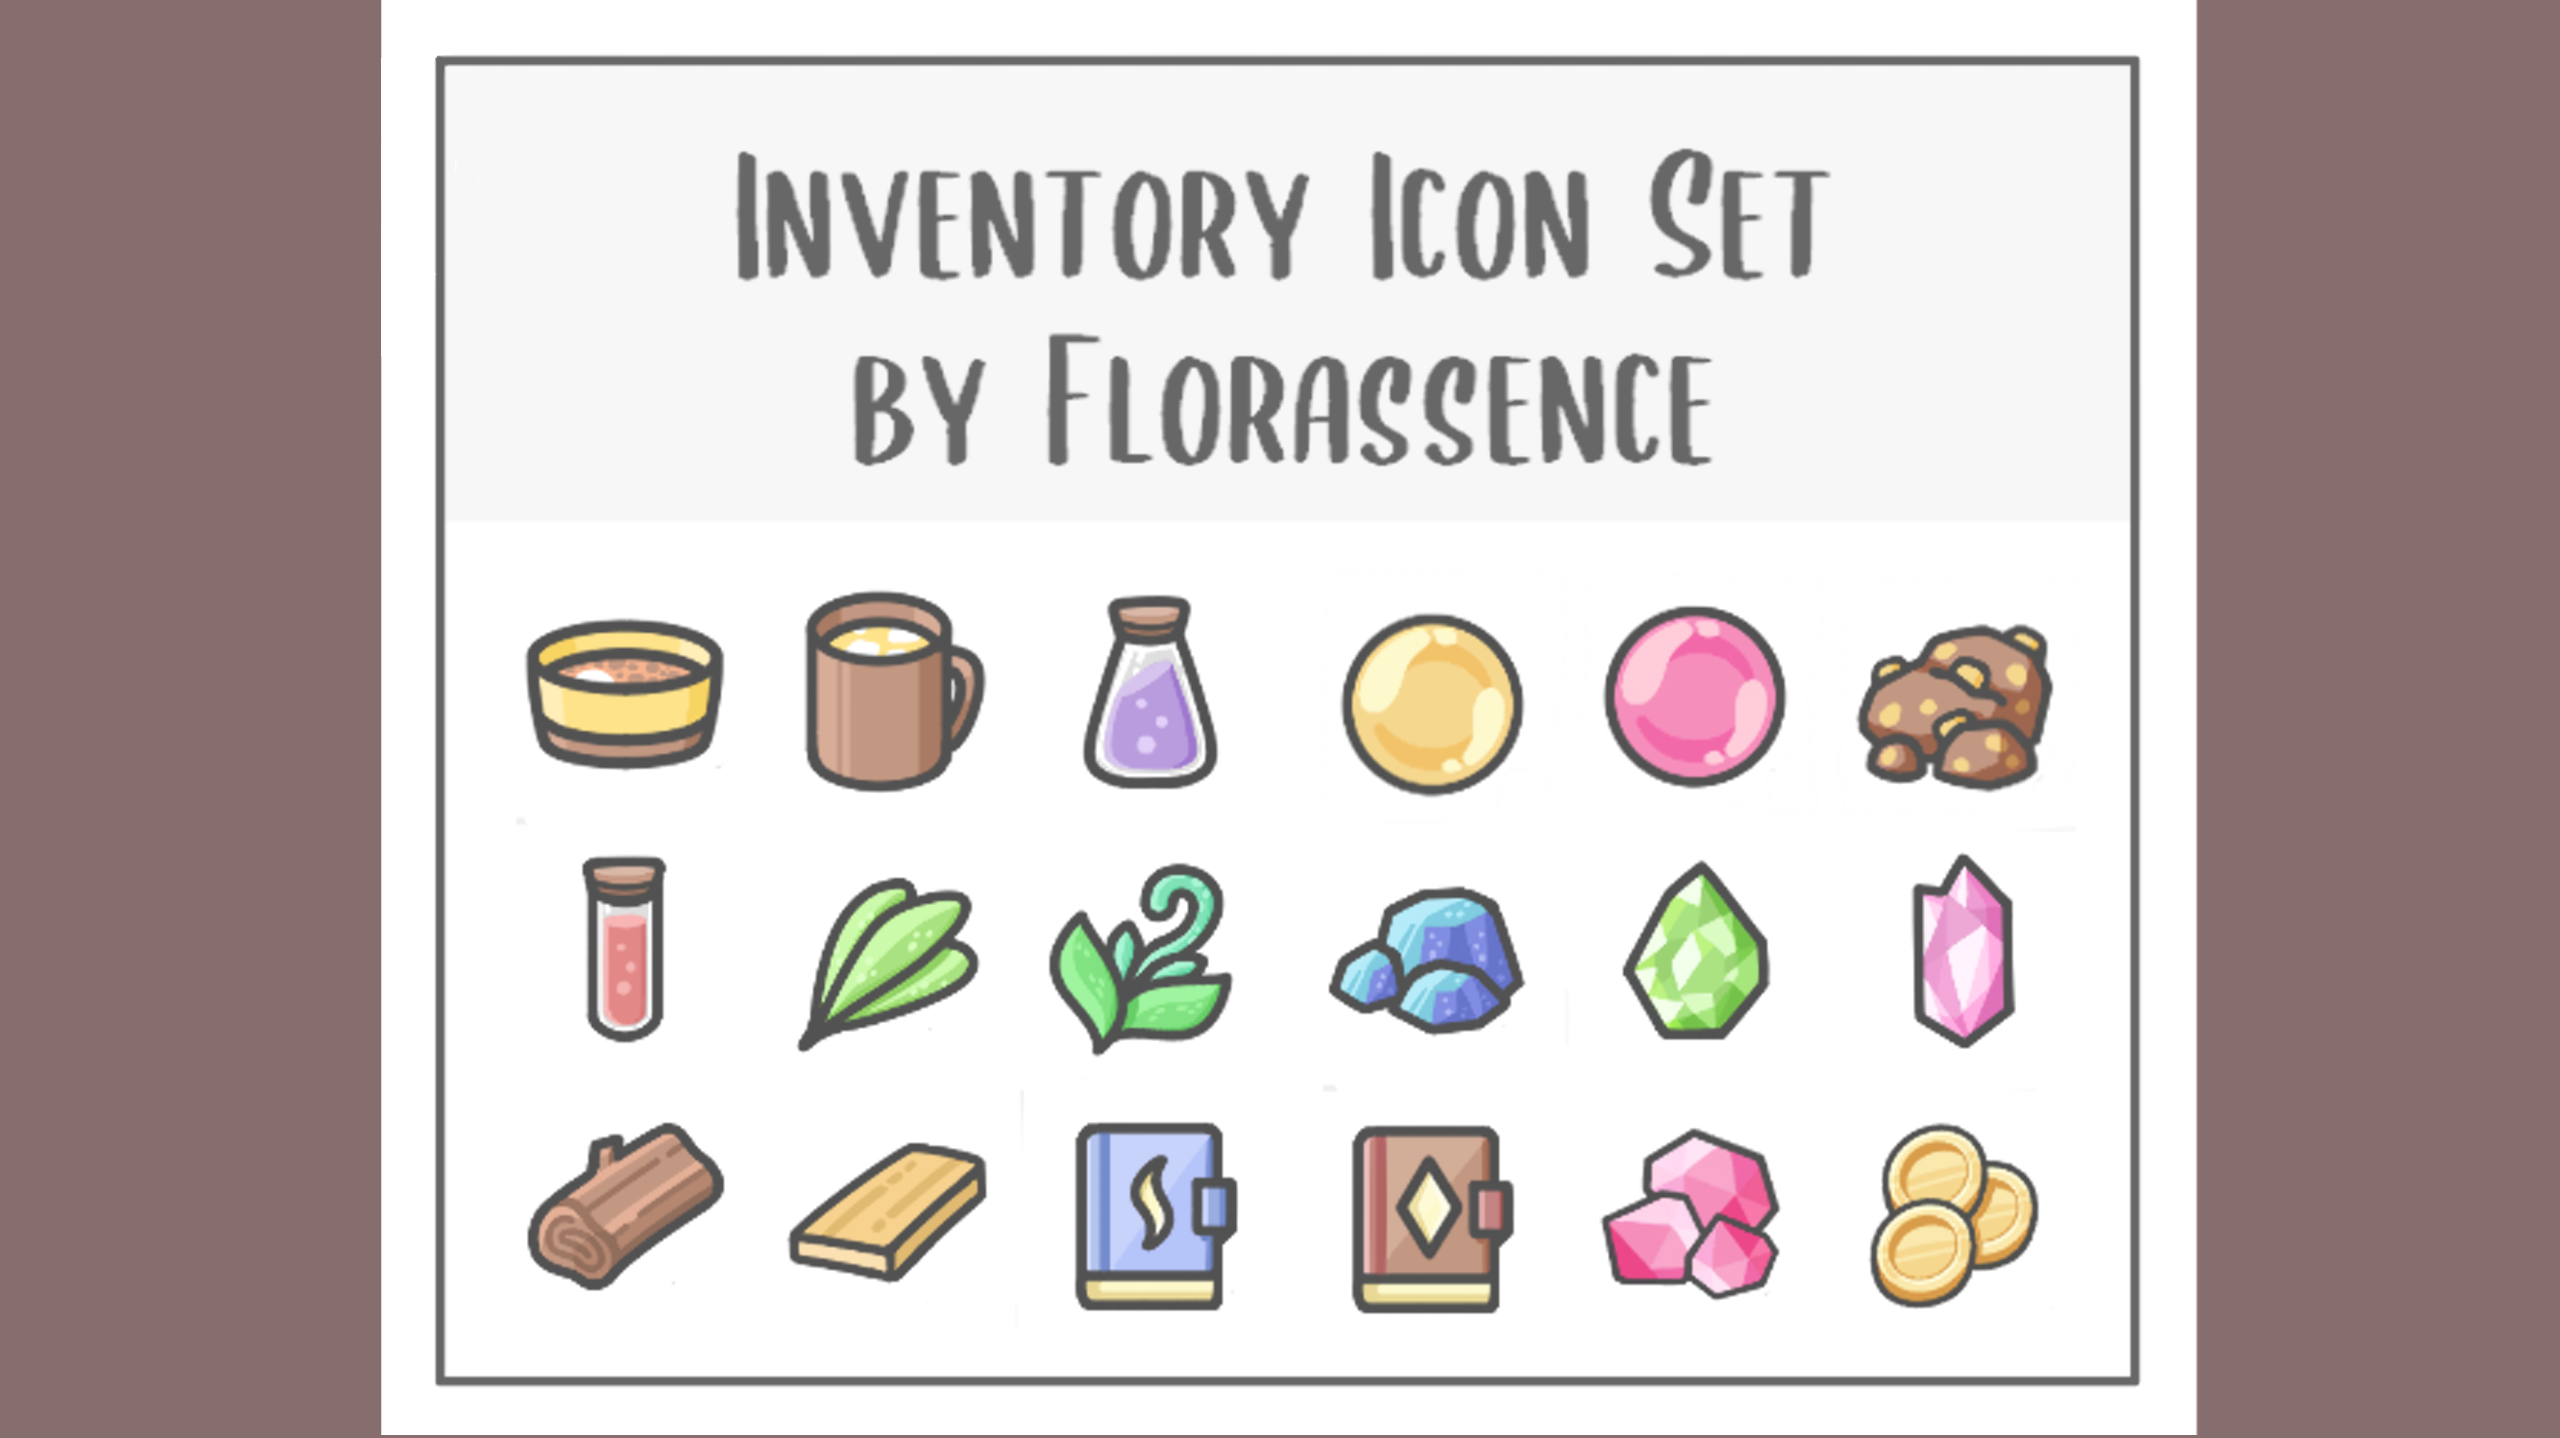 Inventory Icons Set-Game Assets [Free]